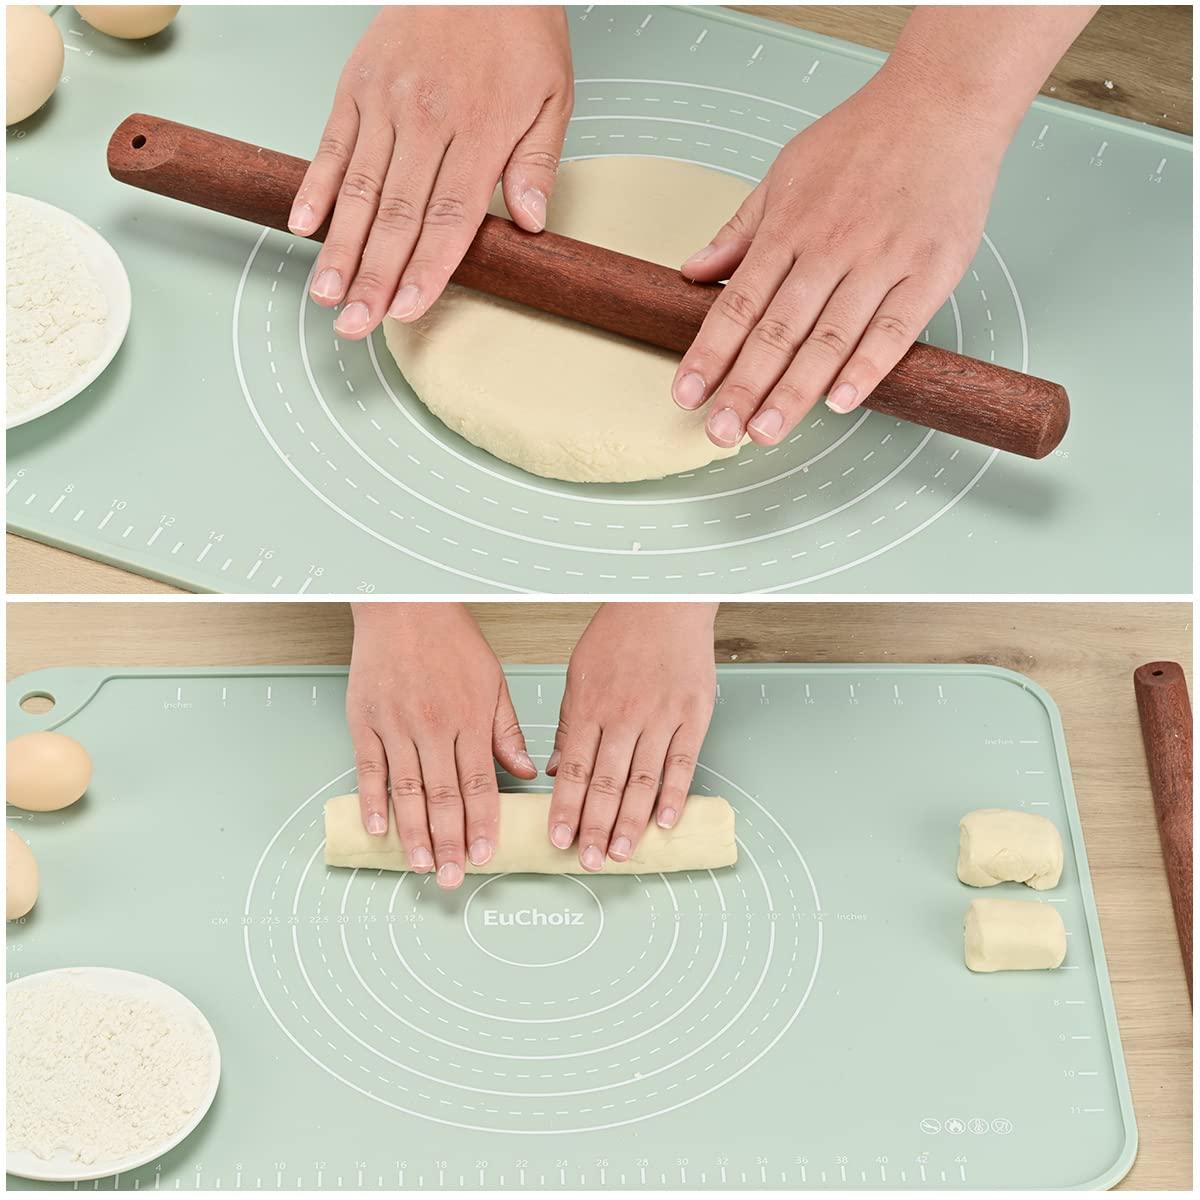 EuChoiz Silicone Pastry Mat 24"*16" Extra Thick Non Stick Baking Mat Food Grade Silicone Dough Rolling Bake Mat with Edge Heightening - CookCave